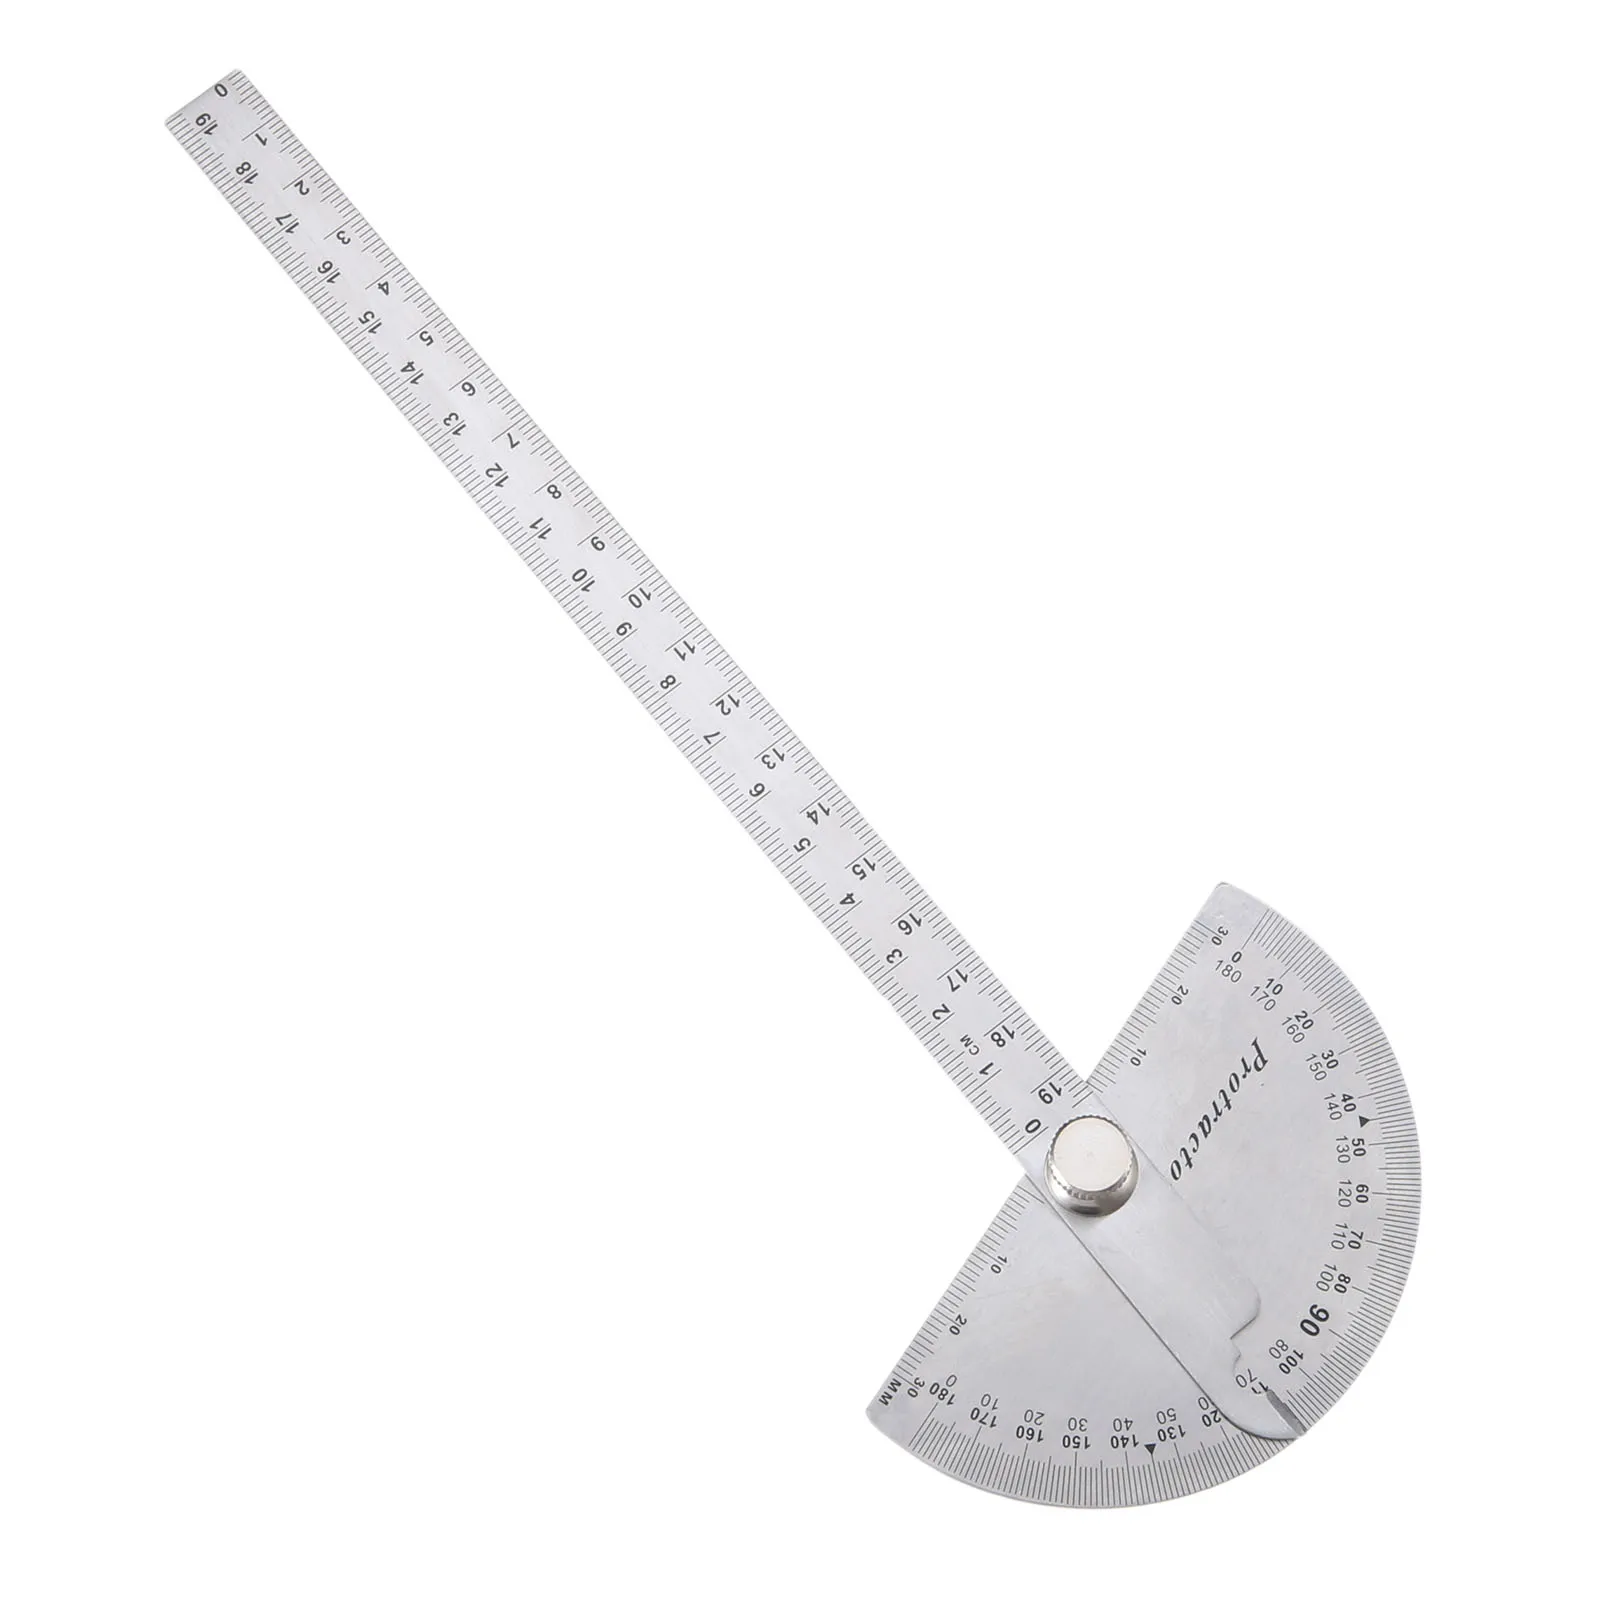 

DRELD Stainless Steel 180 Degree Protractor Angle Finder Angle Ruler Measuring Gauging Tool 190mm Carpenter Woodworking Tools